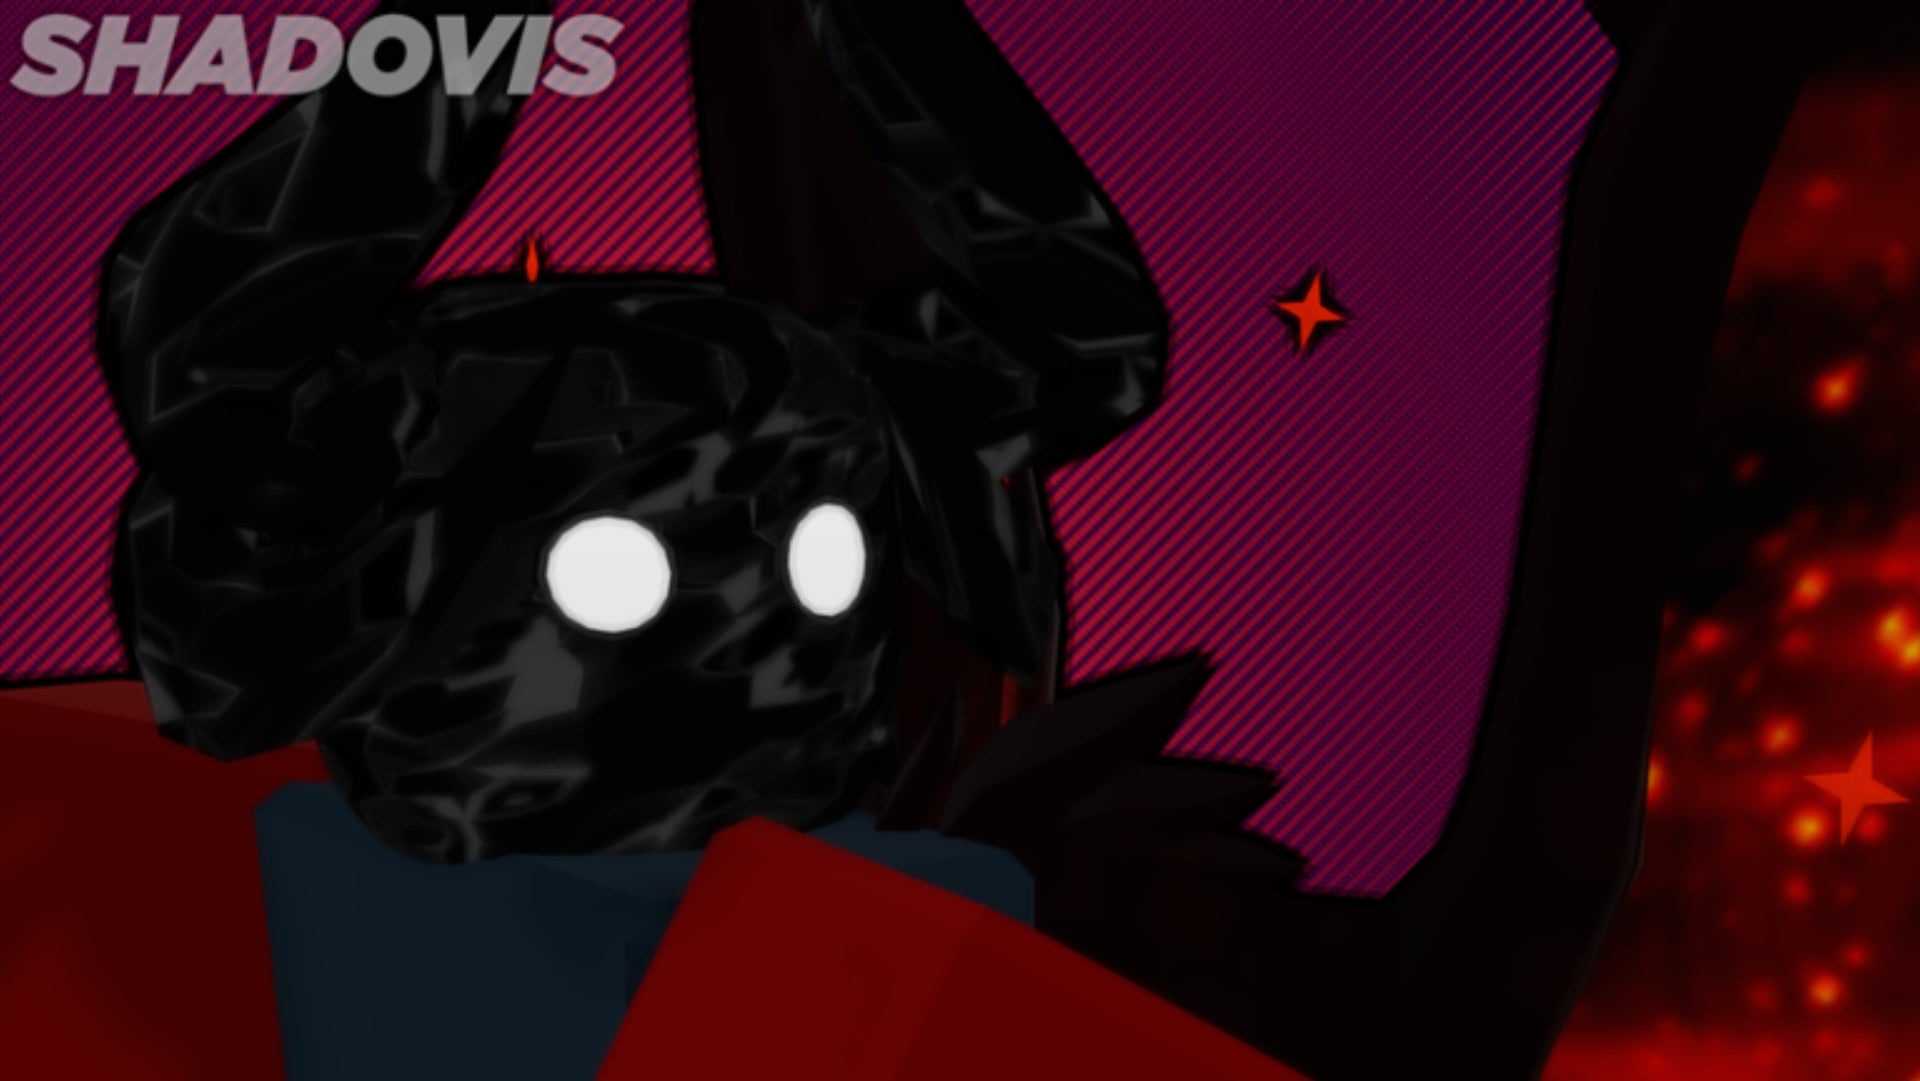 Roblox Shadovis RPG official art, a shadow figure with white eyes is lurking in front of a dark purple and red background